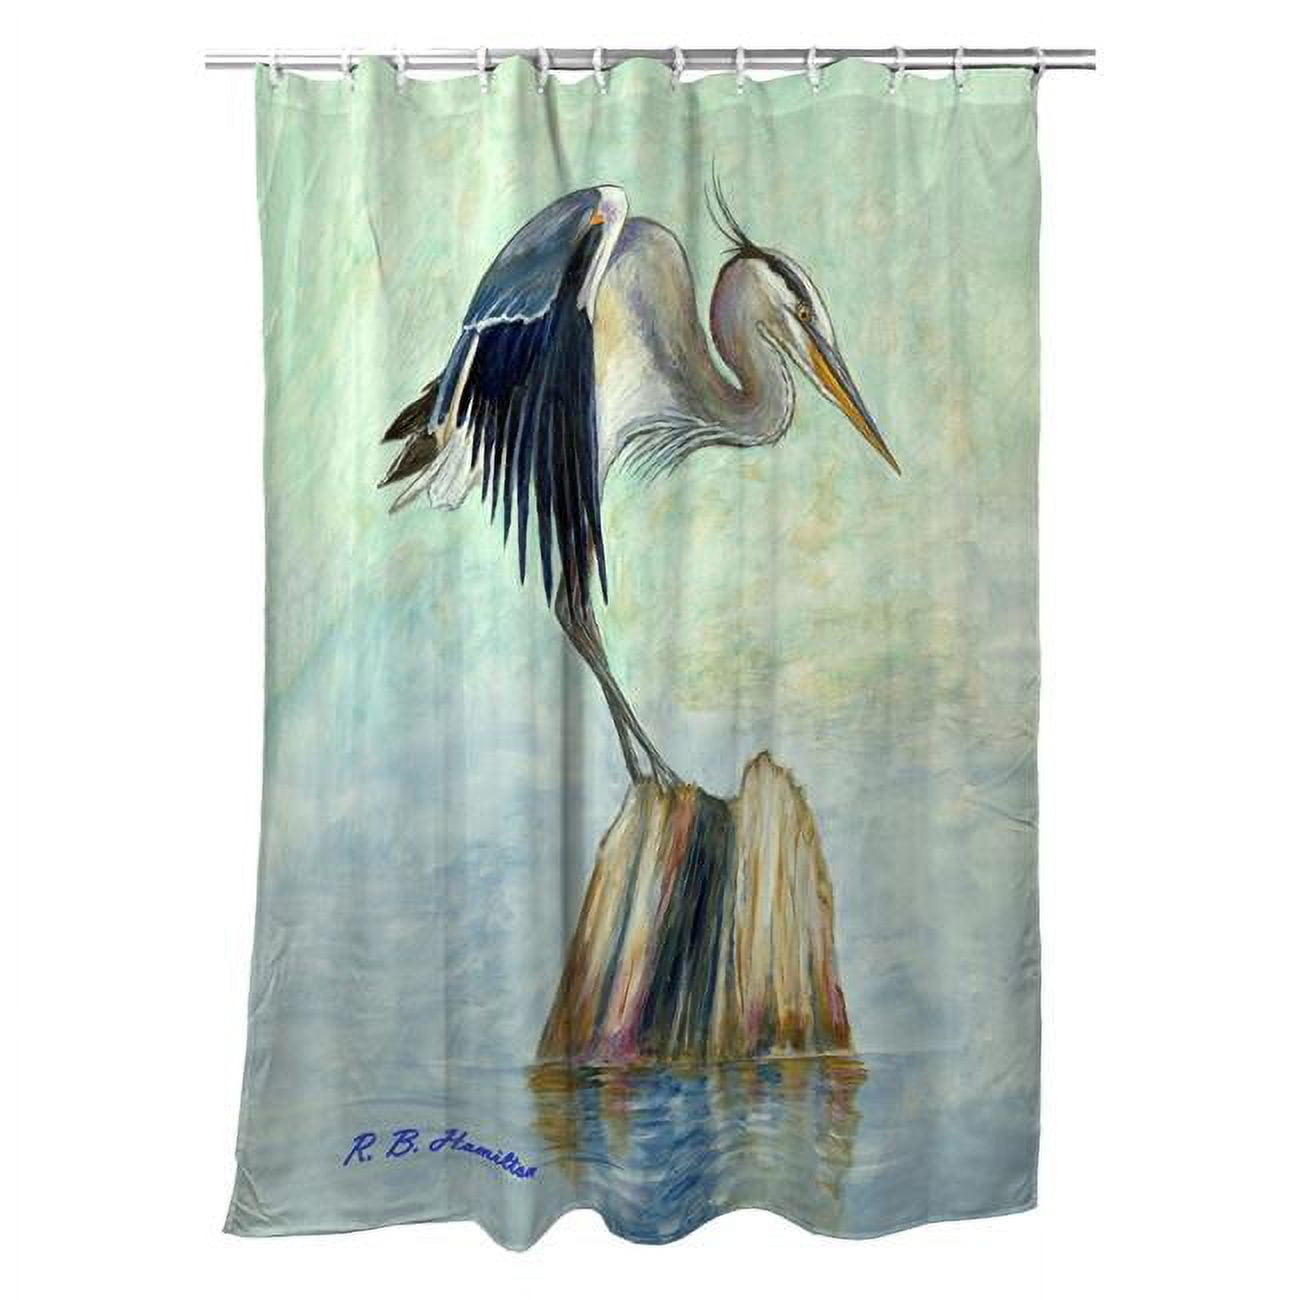 Picture of Betsydrake SH1175 71 x 74 in. Balancing Heron Shower Curtain